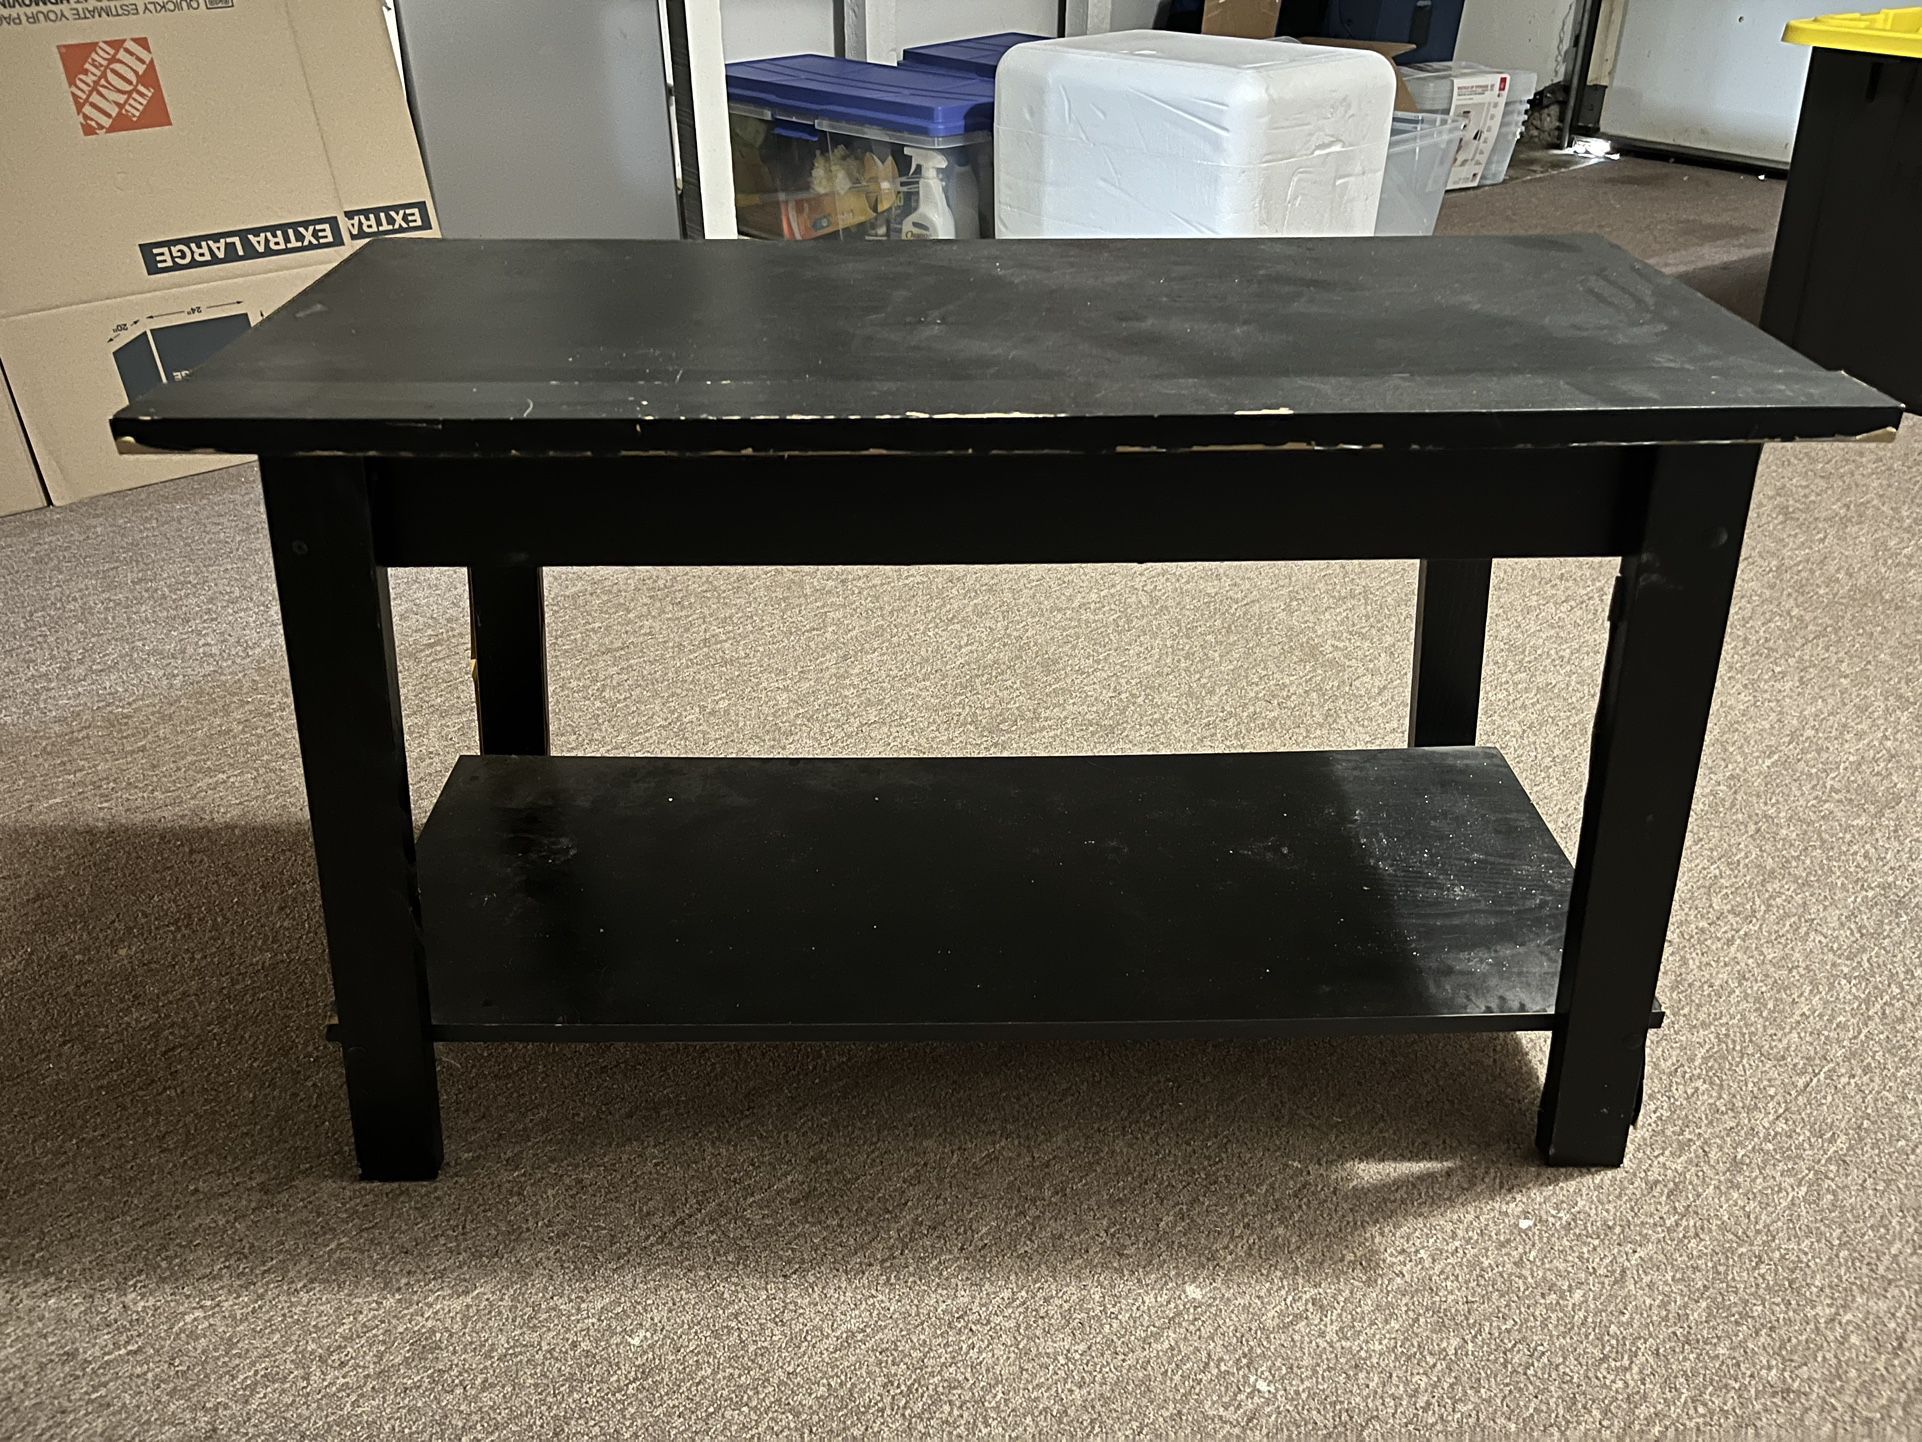 Small Black Table